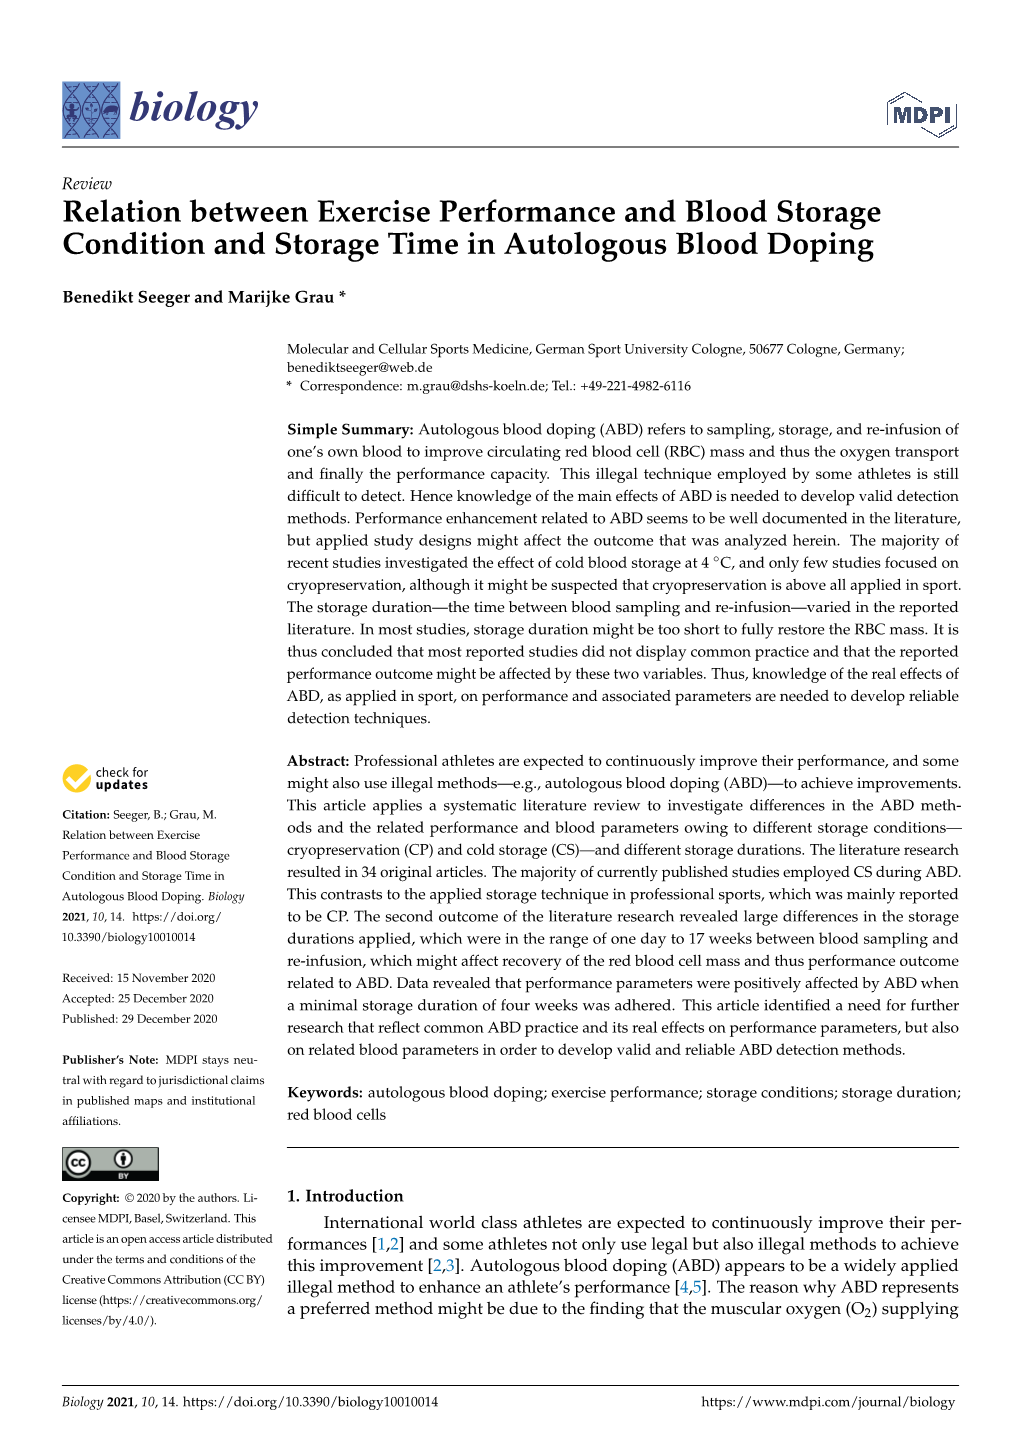 Relation Between Exercise Performance and Blood Storage Condition and Storage Time in Autologous Blood Doping